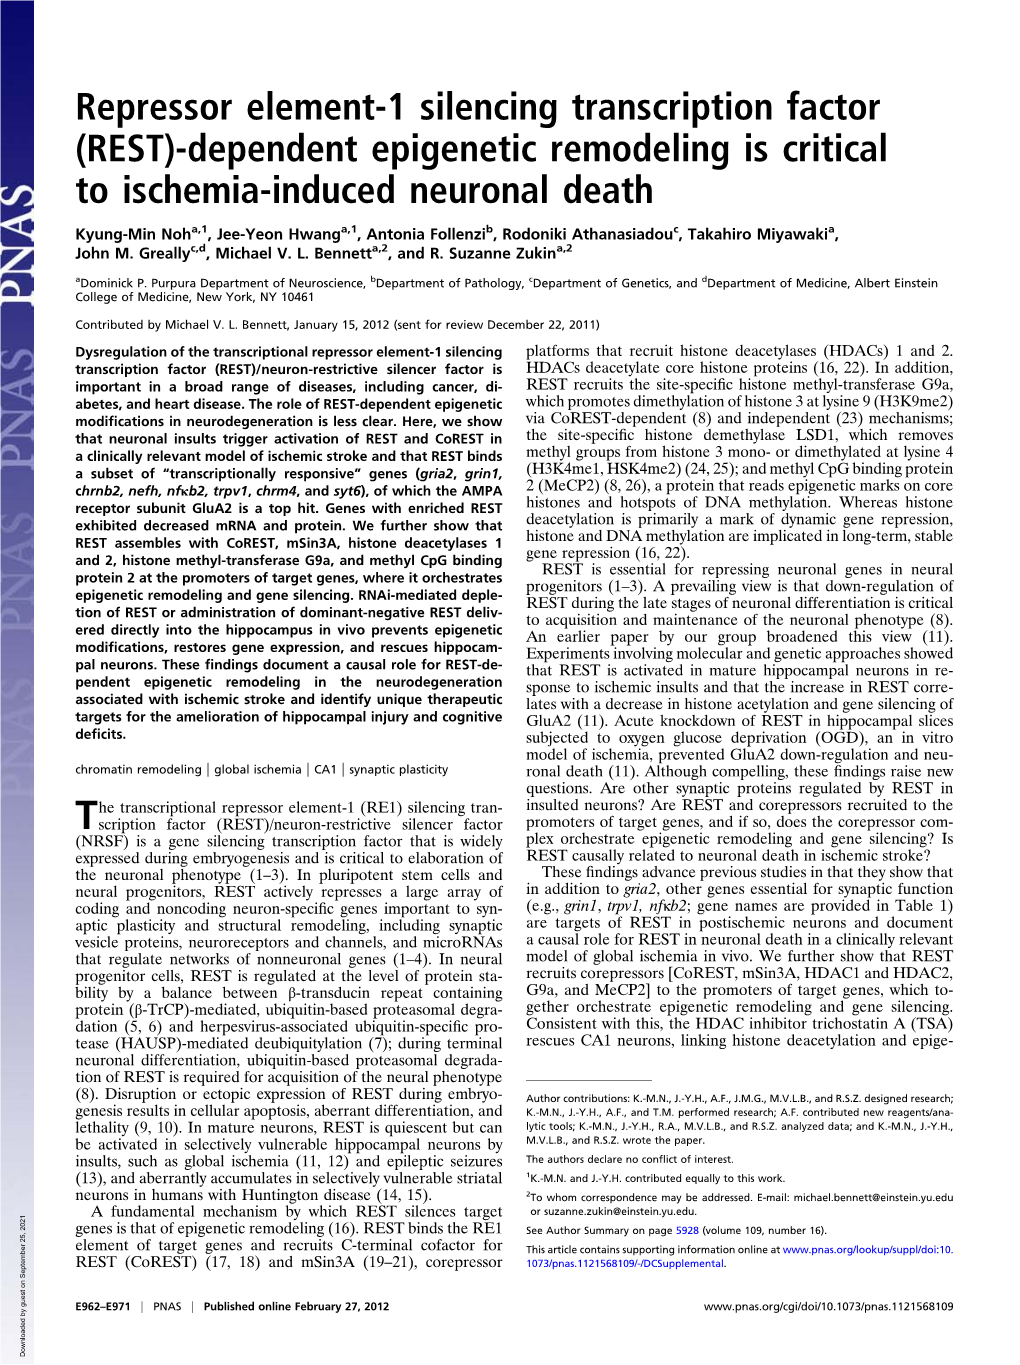 REST)-Dependent Epigenetic Remodeling Is Critical to Ischemia-Induced Neuronal Death